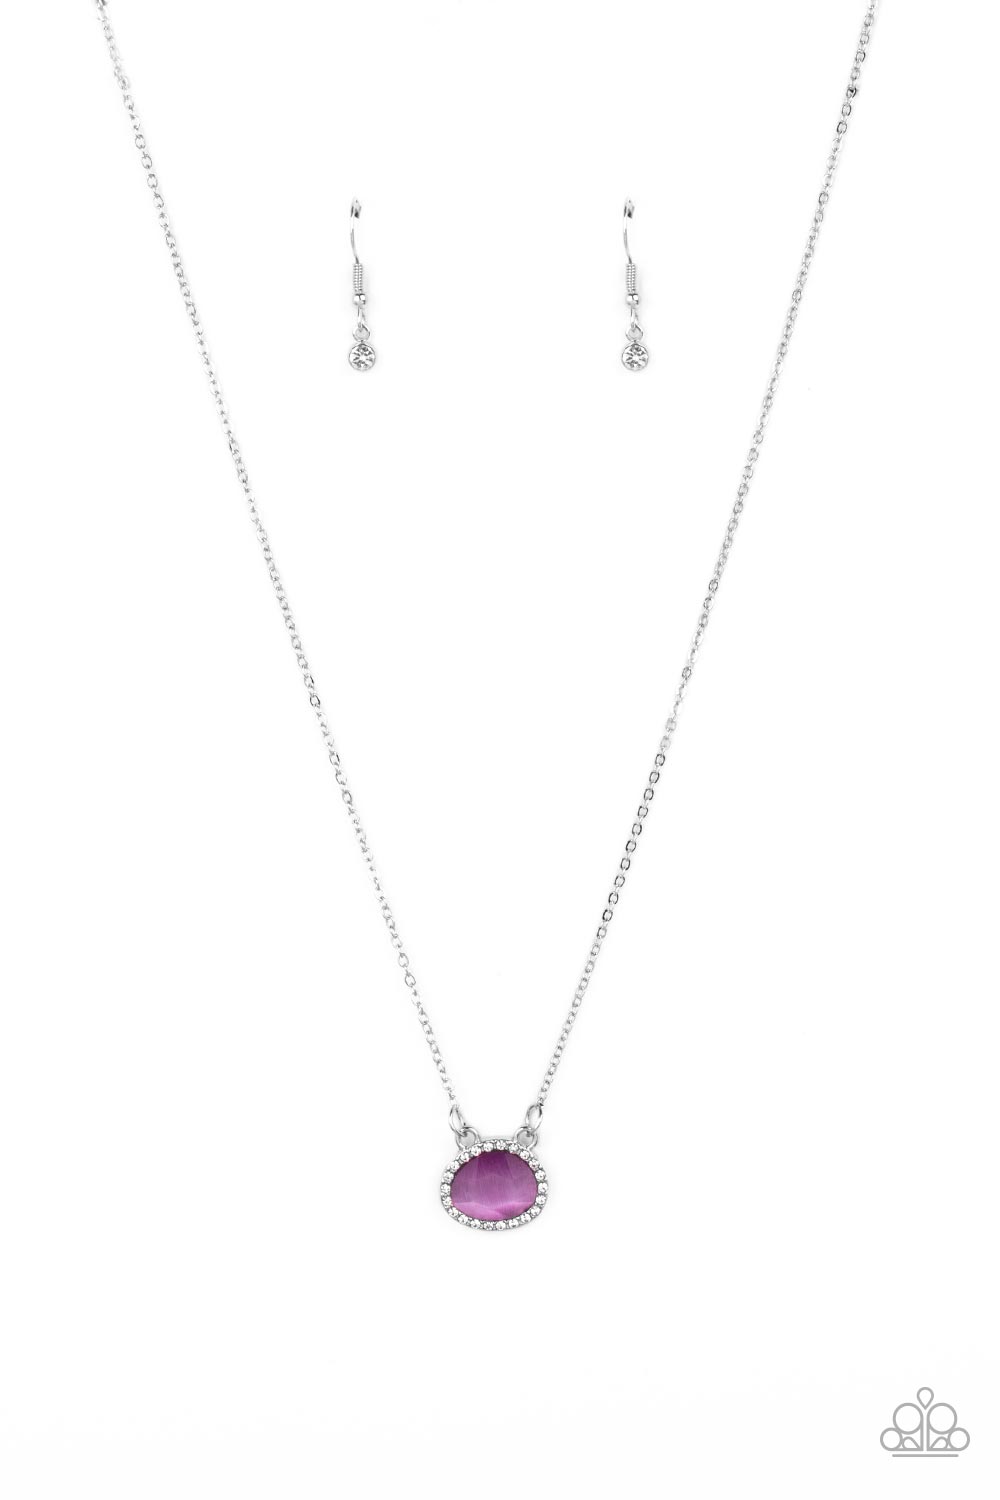 Treasure Me Always Paparazzi Accessories Necklace with Earrings Purple